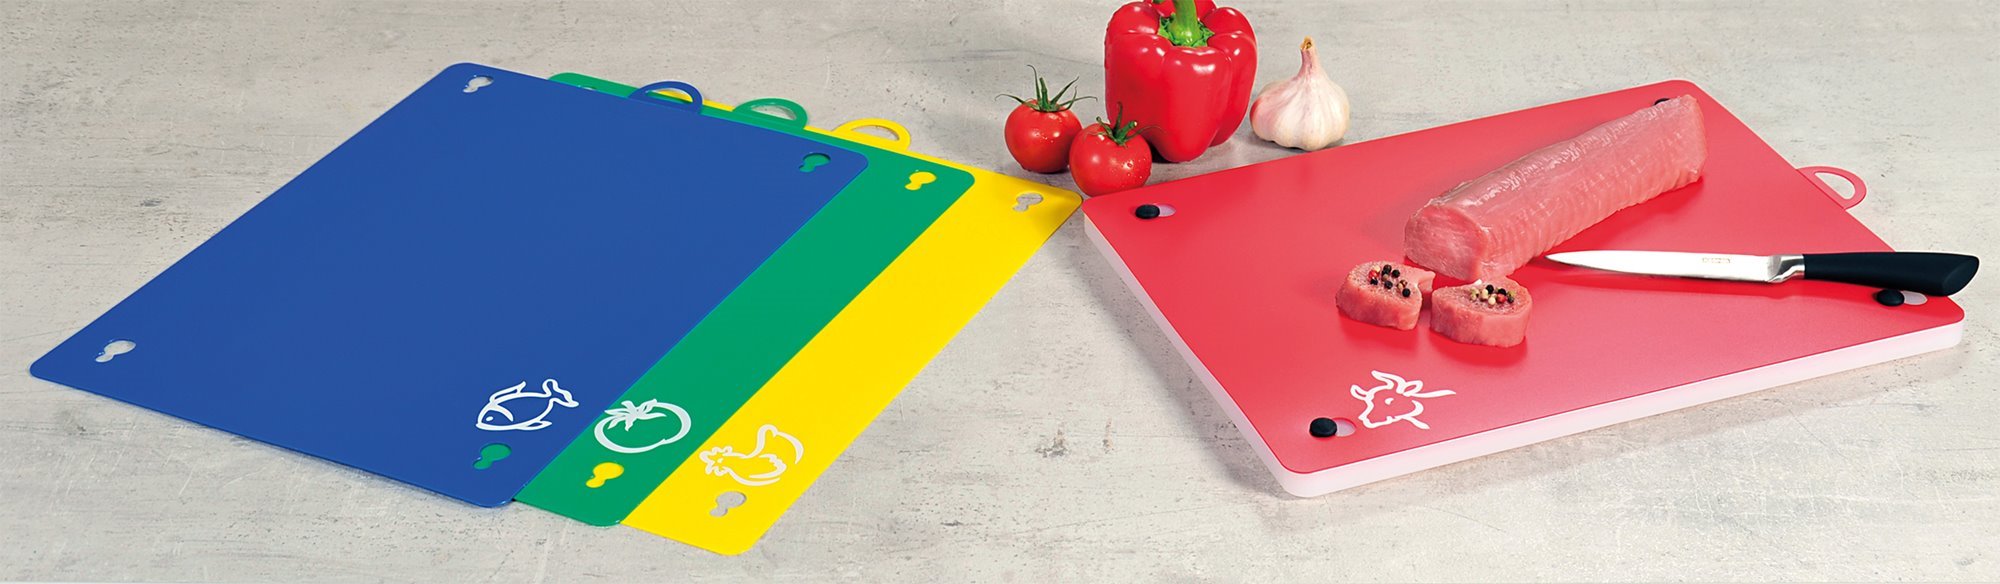 Set of cutting board and interchangeable cutting topper sheets, 5 pieces -  Kesper | KitchenShop